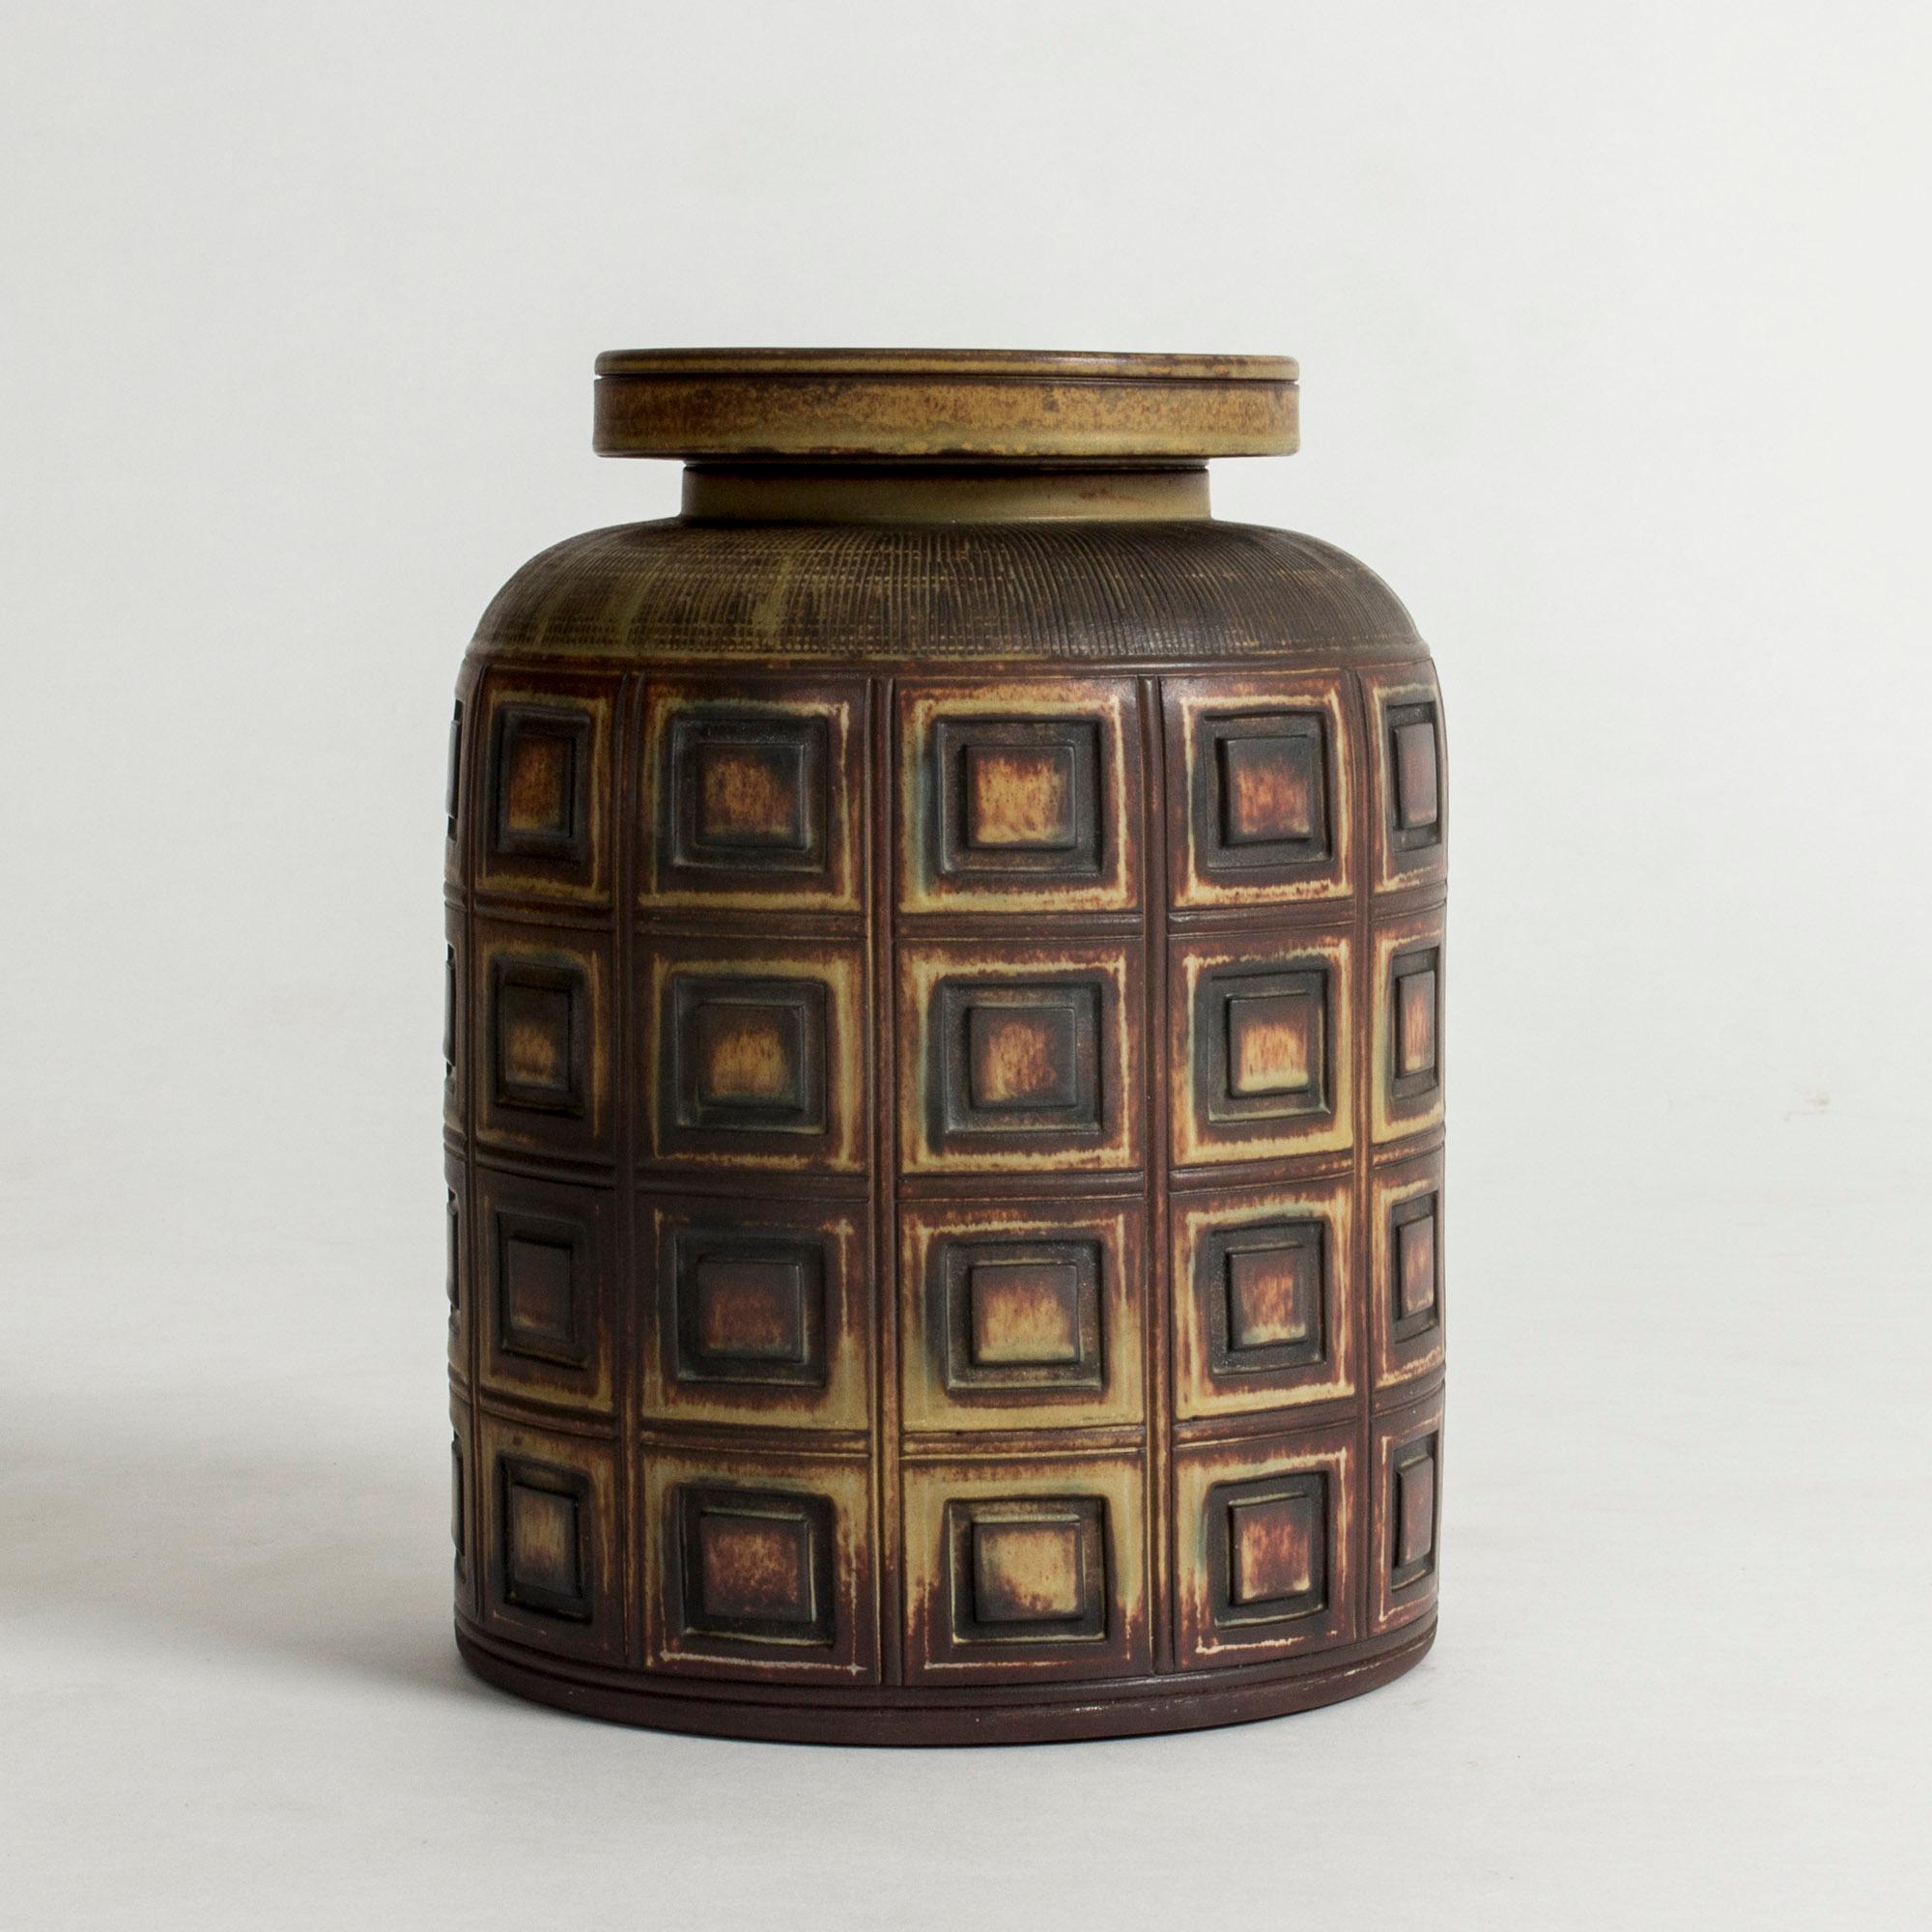 Striking lidded “Farsta Rust” vase by Wilhelm Kåge, in a robust design with a pattern of embossed squares.

“Farsta” stoneware is recognized as being the best and most exclusive that has come out of Swedish arts and crafts. The series represents